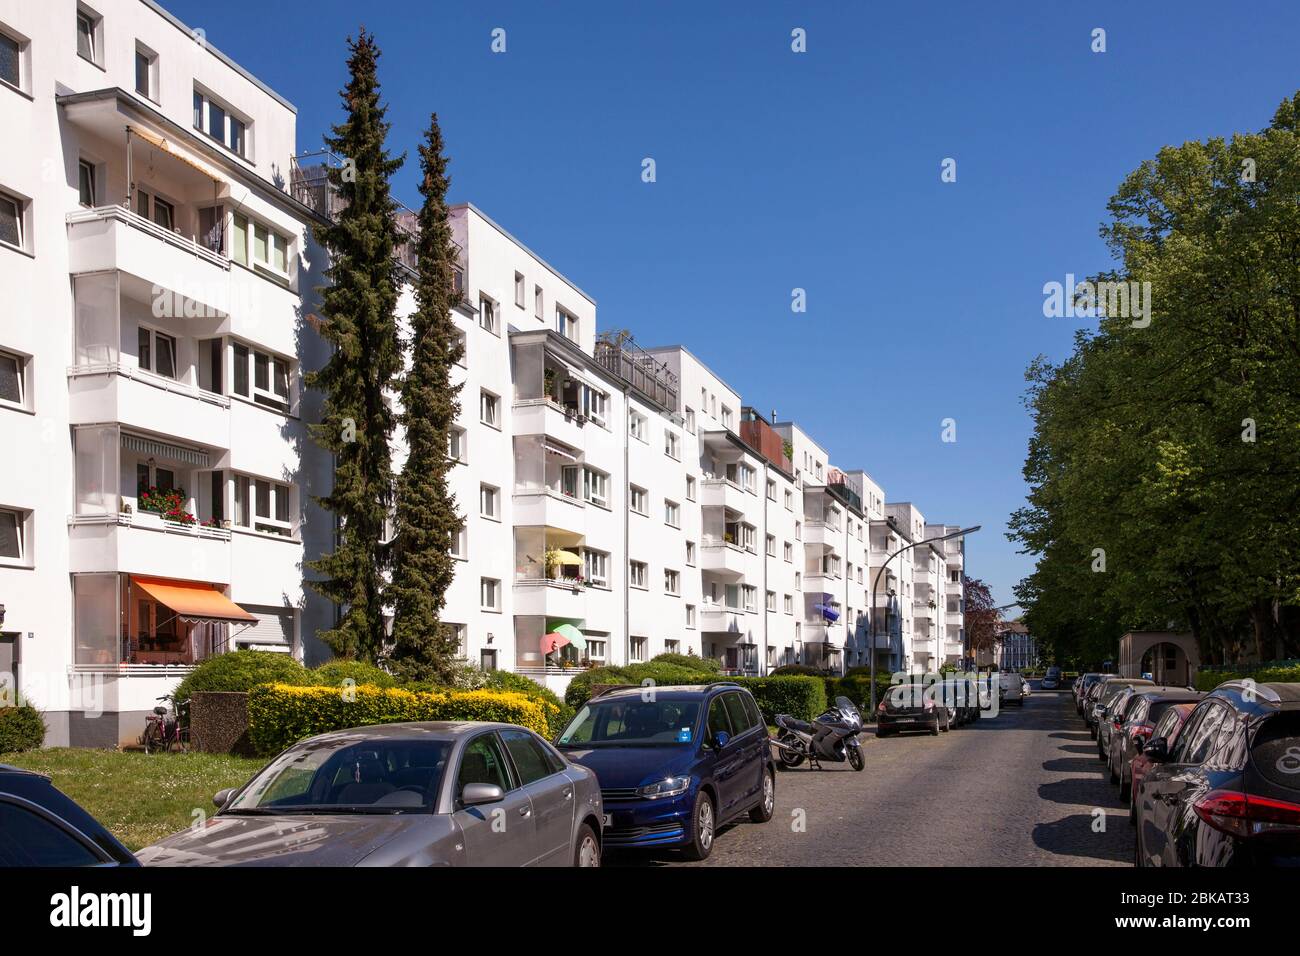 the housing estate Weisse Stadt in the district-Buchforst, built 1929-32 according to plans by Wilhelm Riphan and Caspar Maria Grod, Cologne, Germany. Stock Photo